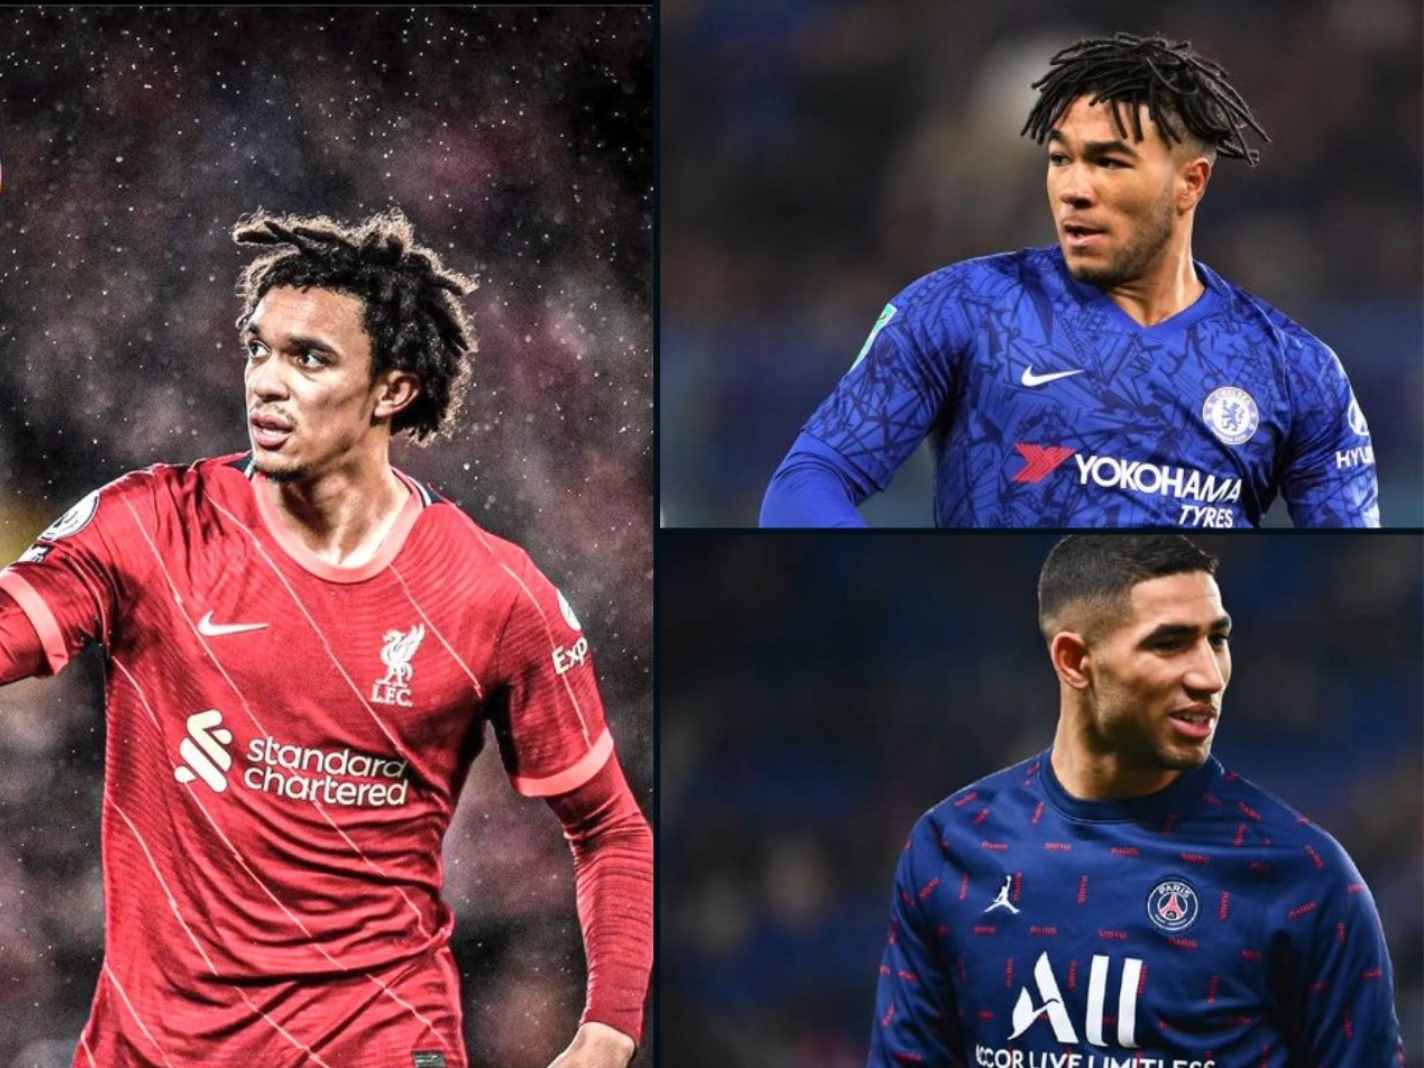 Dani Alves has named Liverpool’s Trent Alexander-Arnold, Chelsea’s Reece James and Paris Saint-Germain’s Achraf Hakimi as the current right-backs he keeps an eye on.